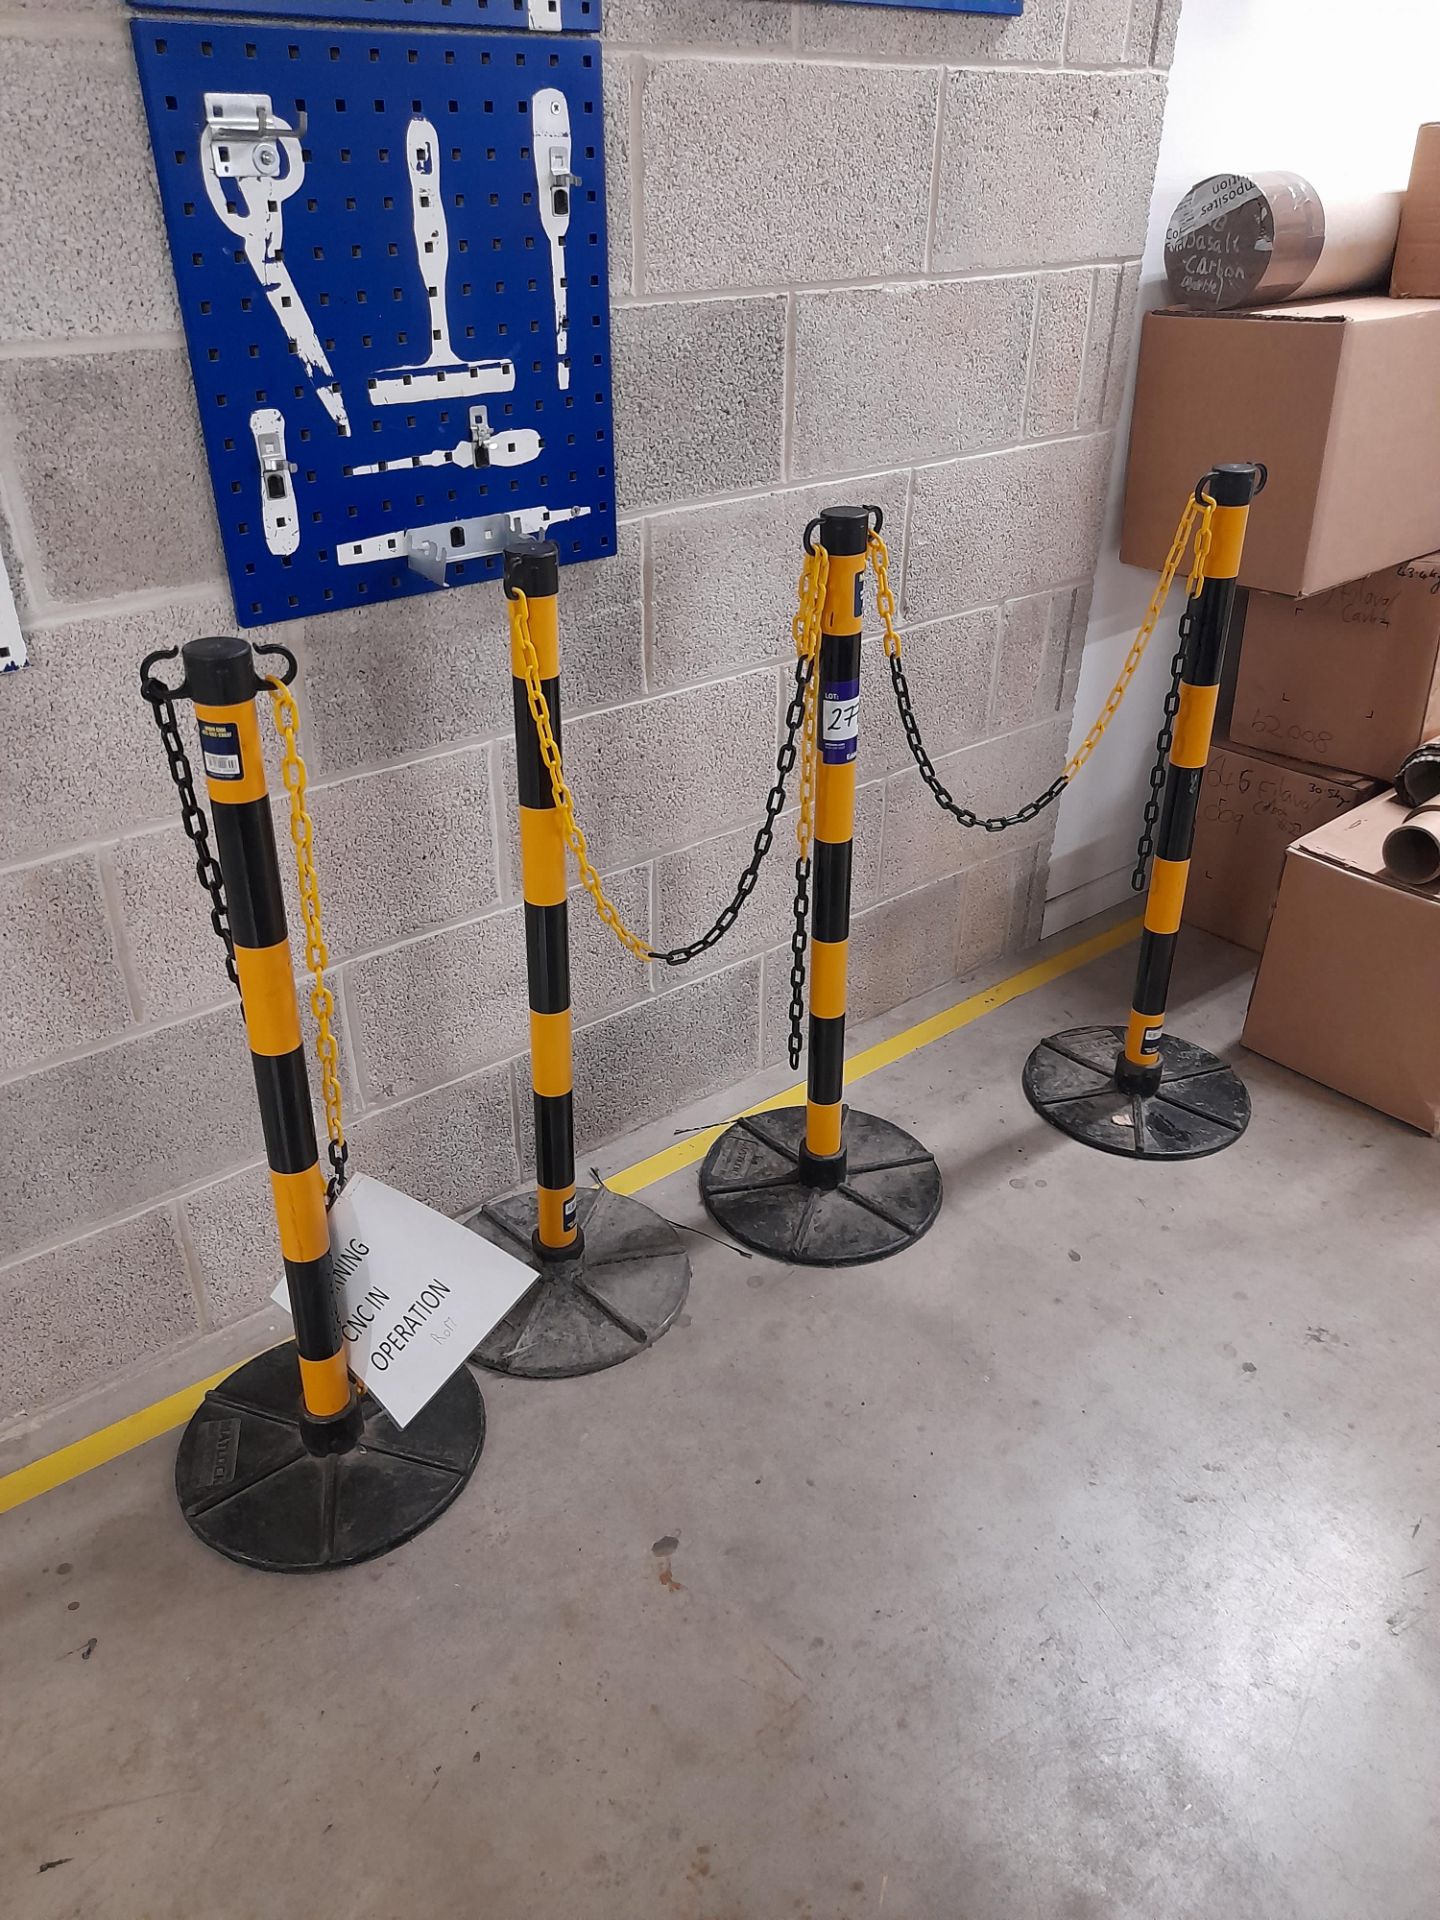 Matlock safety barrier - 4 posts with chain - Image 2 of 2